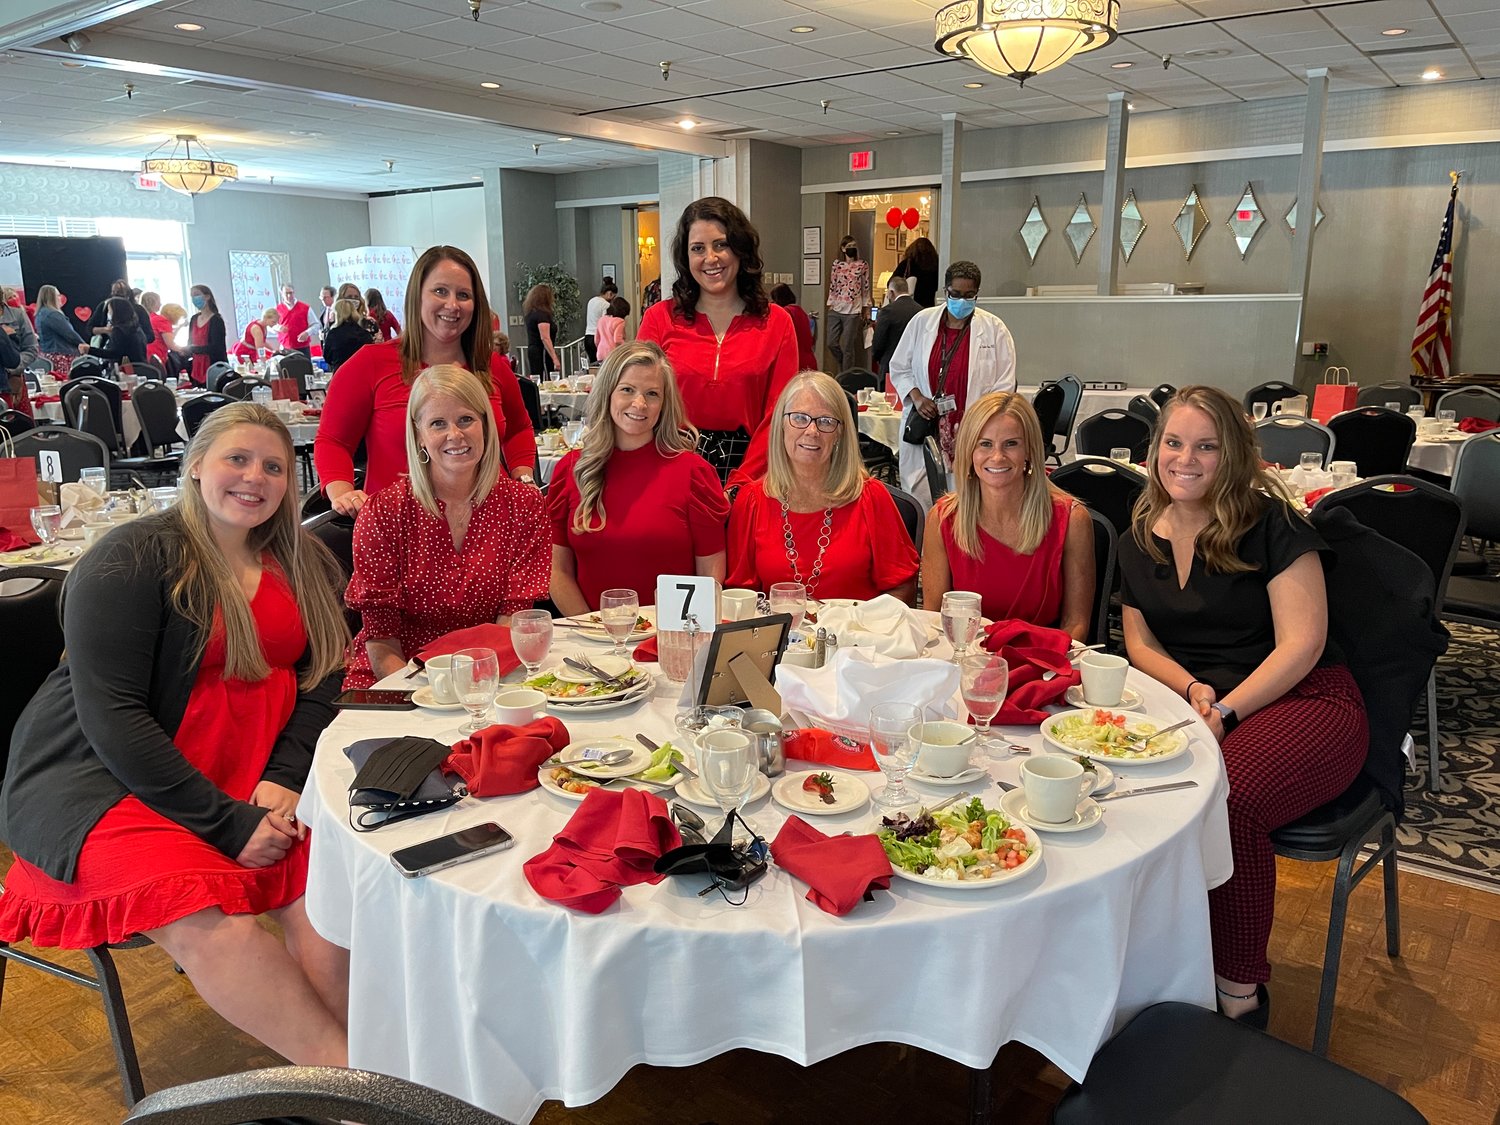 Women from Standard Insulating Co. at the Go Red For Women Luncheon on Wednesday at Hart’s Hill Inn in Whitesboro.